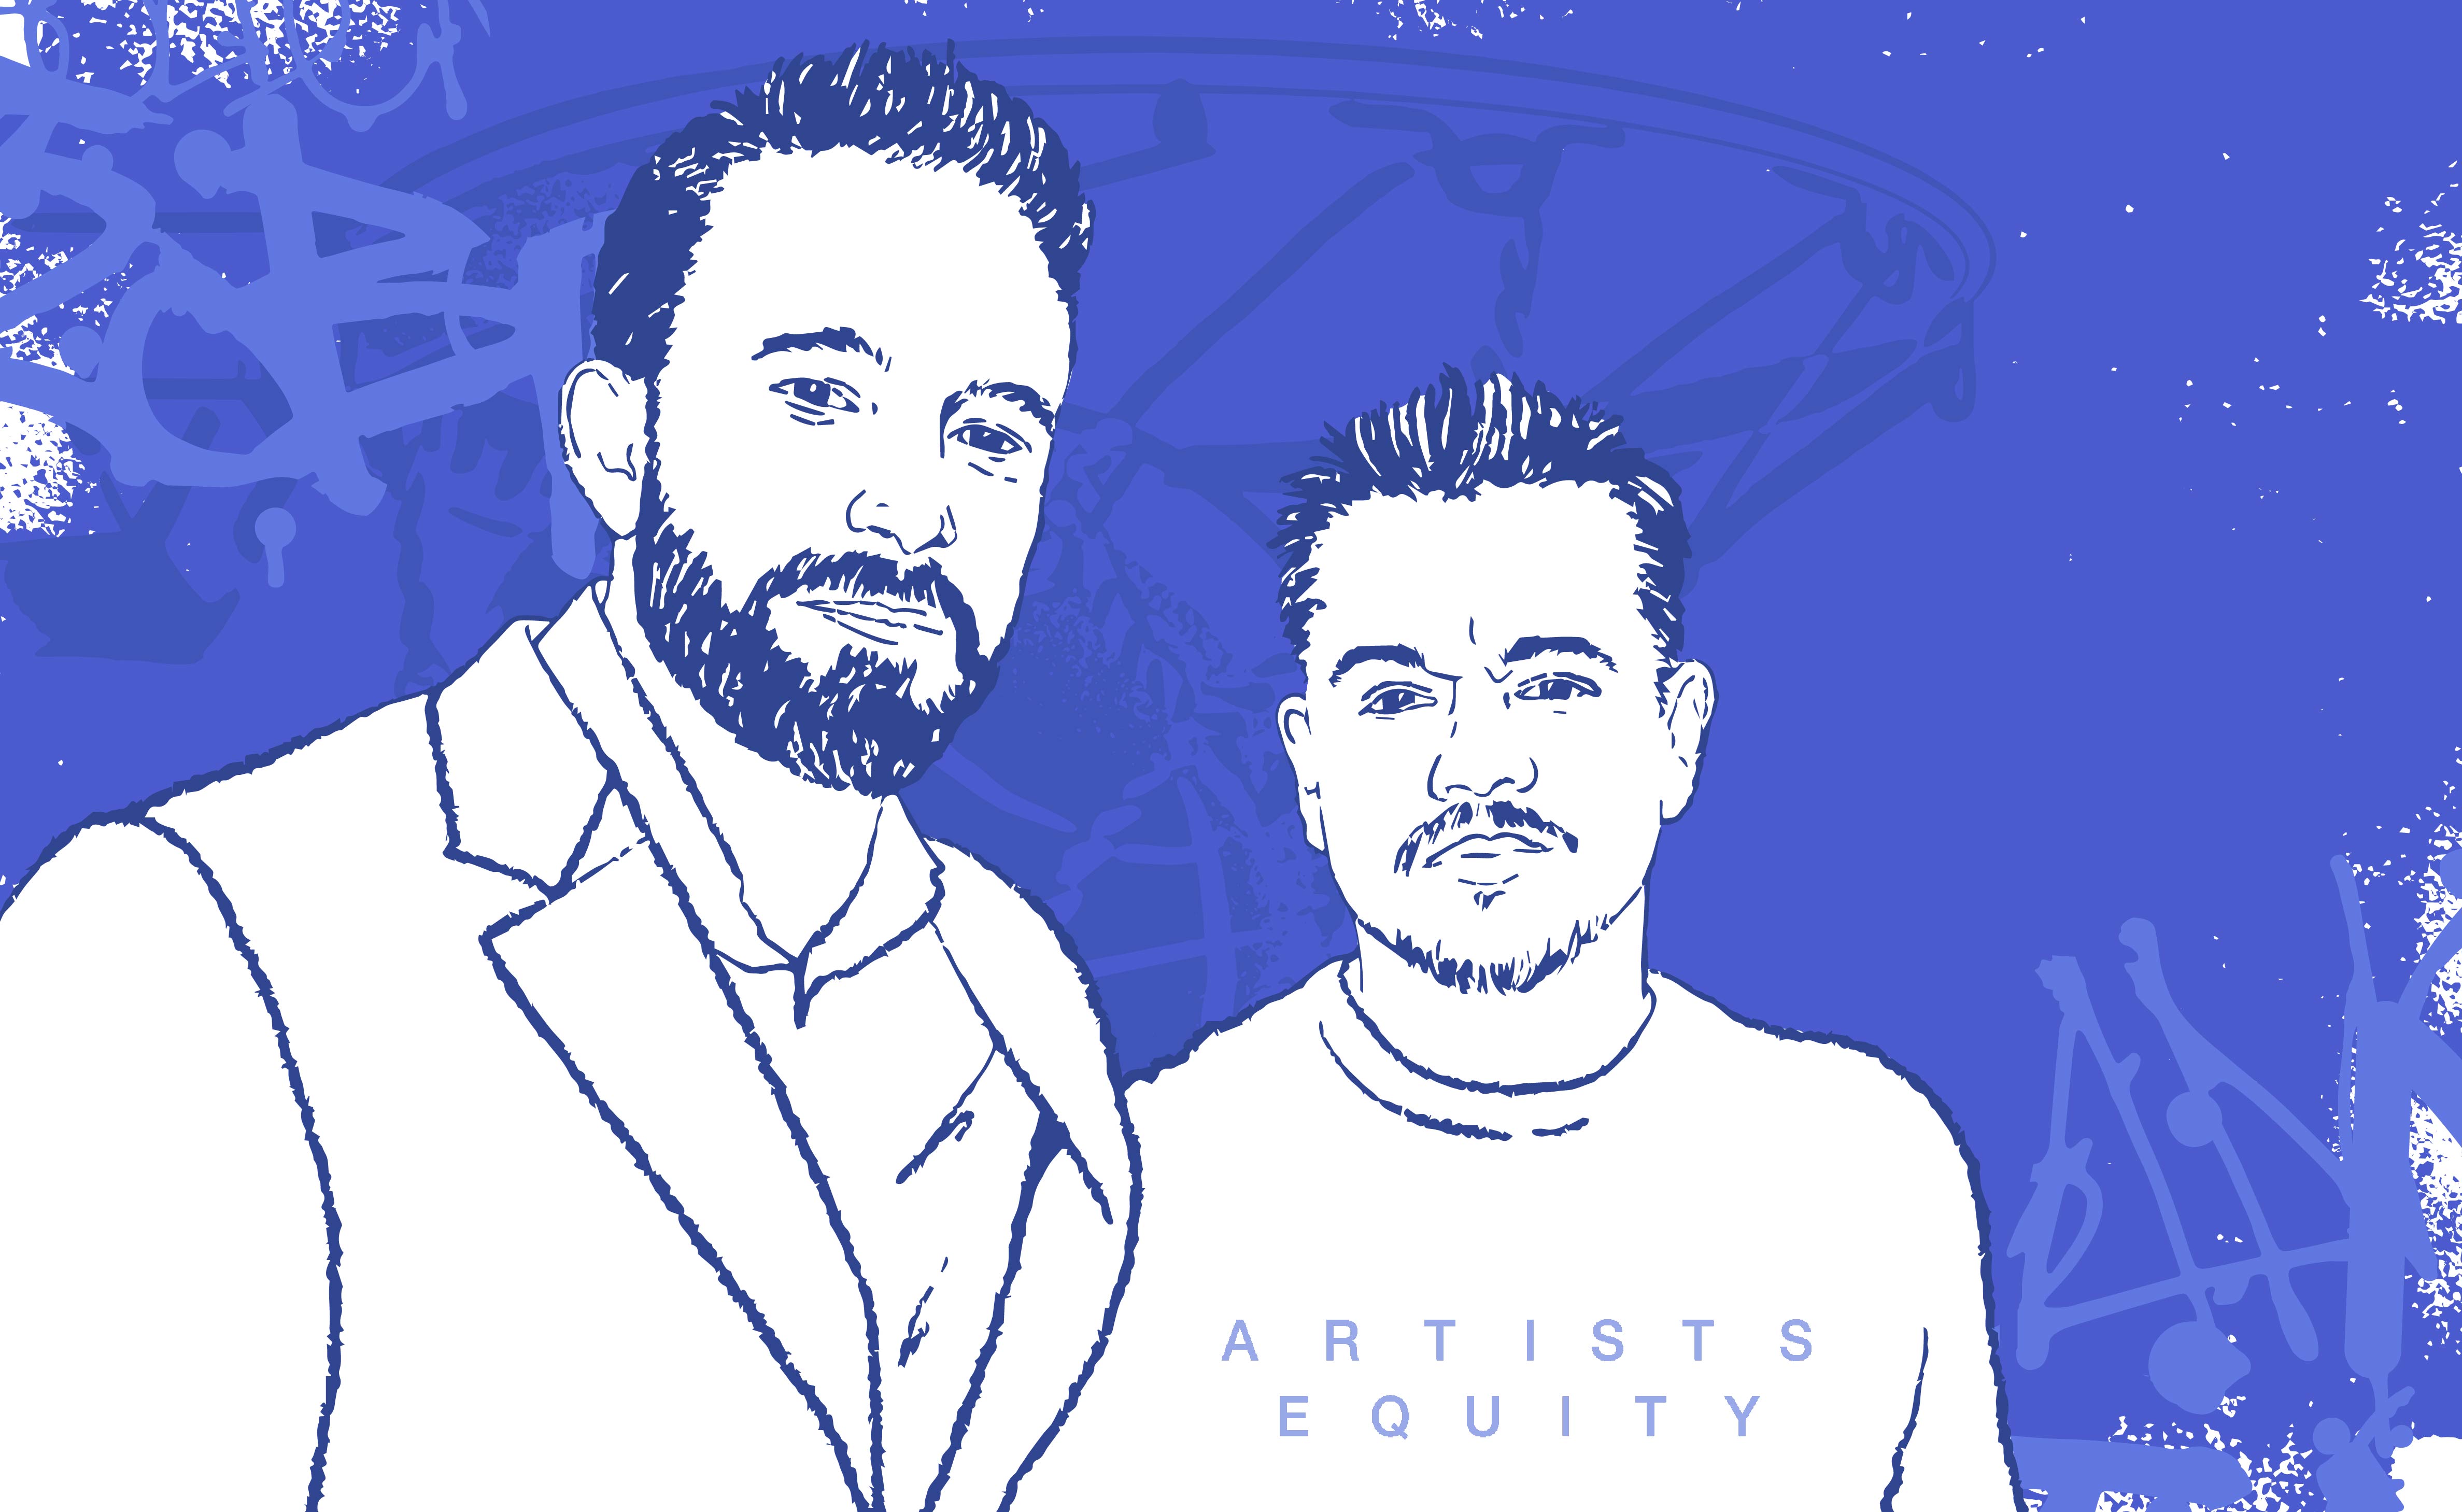 Mat Damon and Ben Affleck with a t-shirt that says Artists Equity